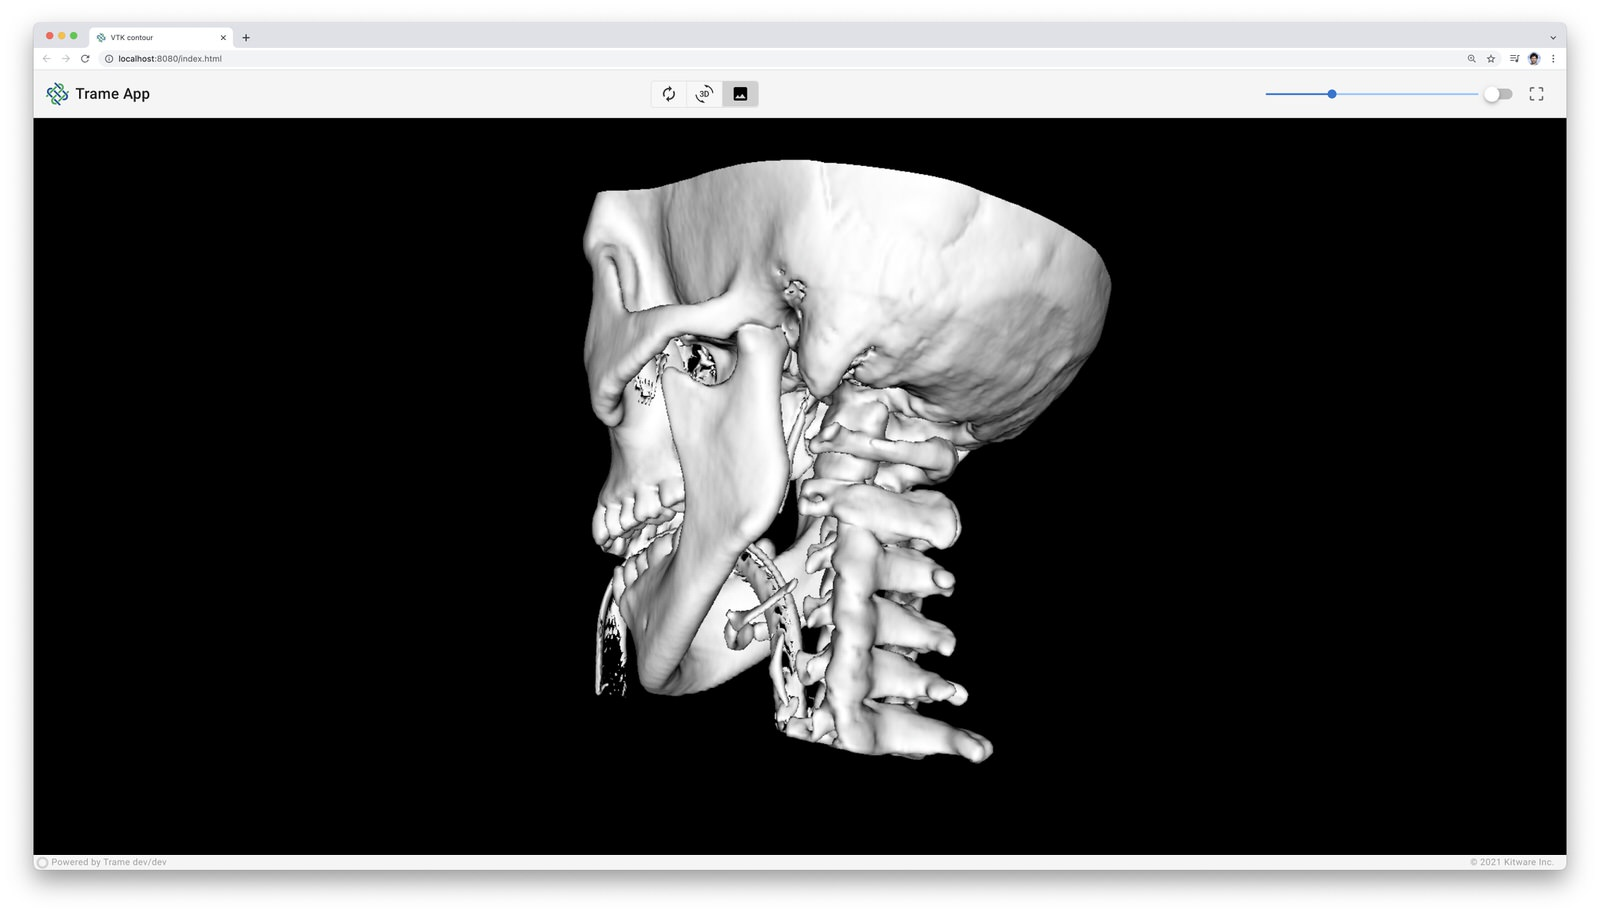 Computer visualization of a human skull in trame